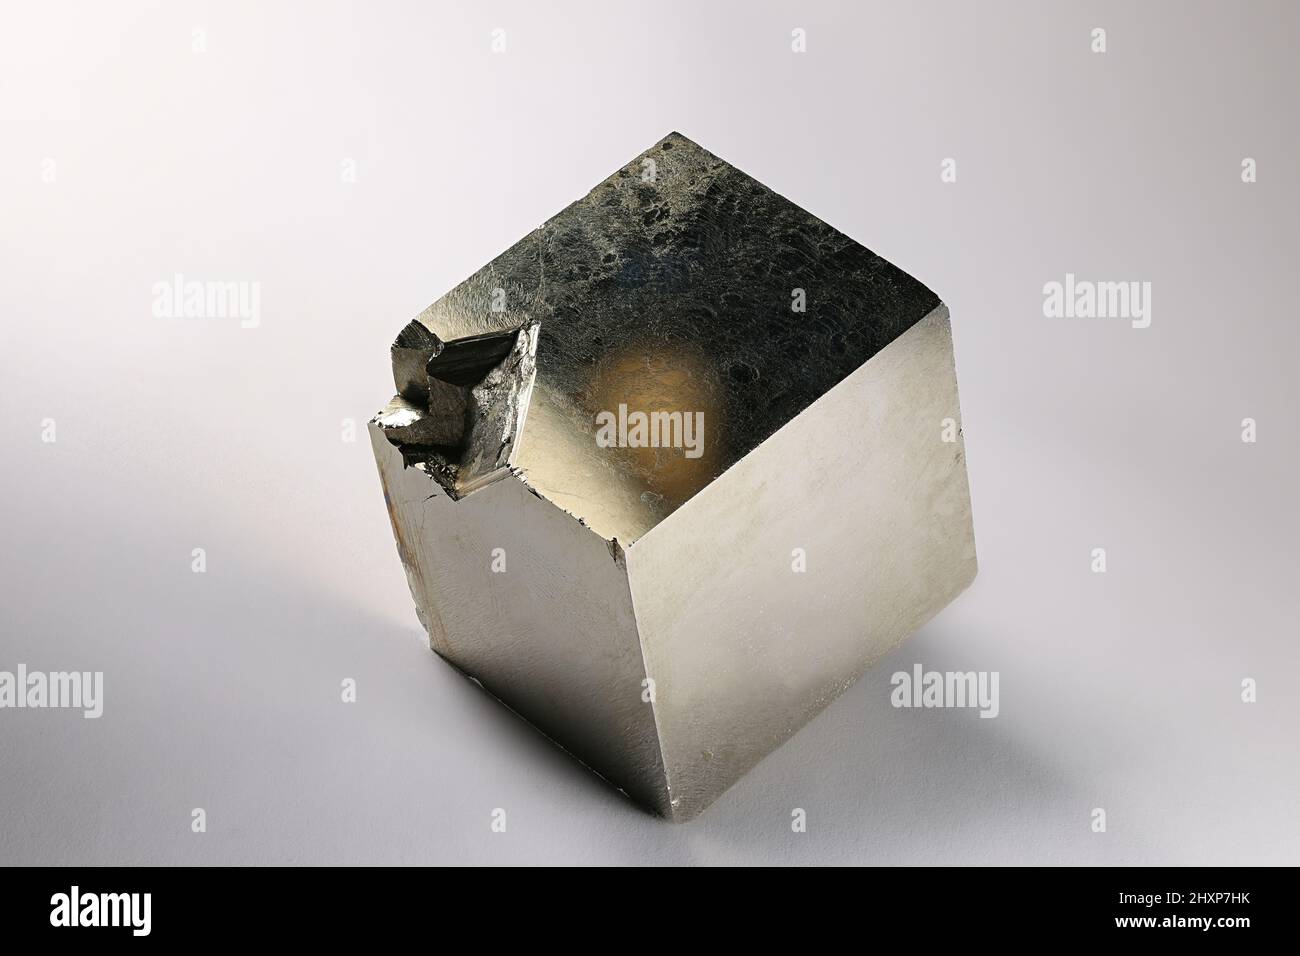 Cubic crystal of pyrite. Pyrite is an iron sulfide and the most abundant sulfide mineral. Stock Photo